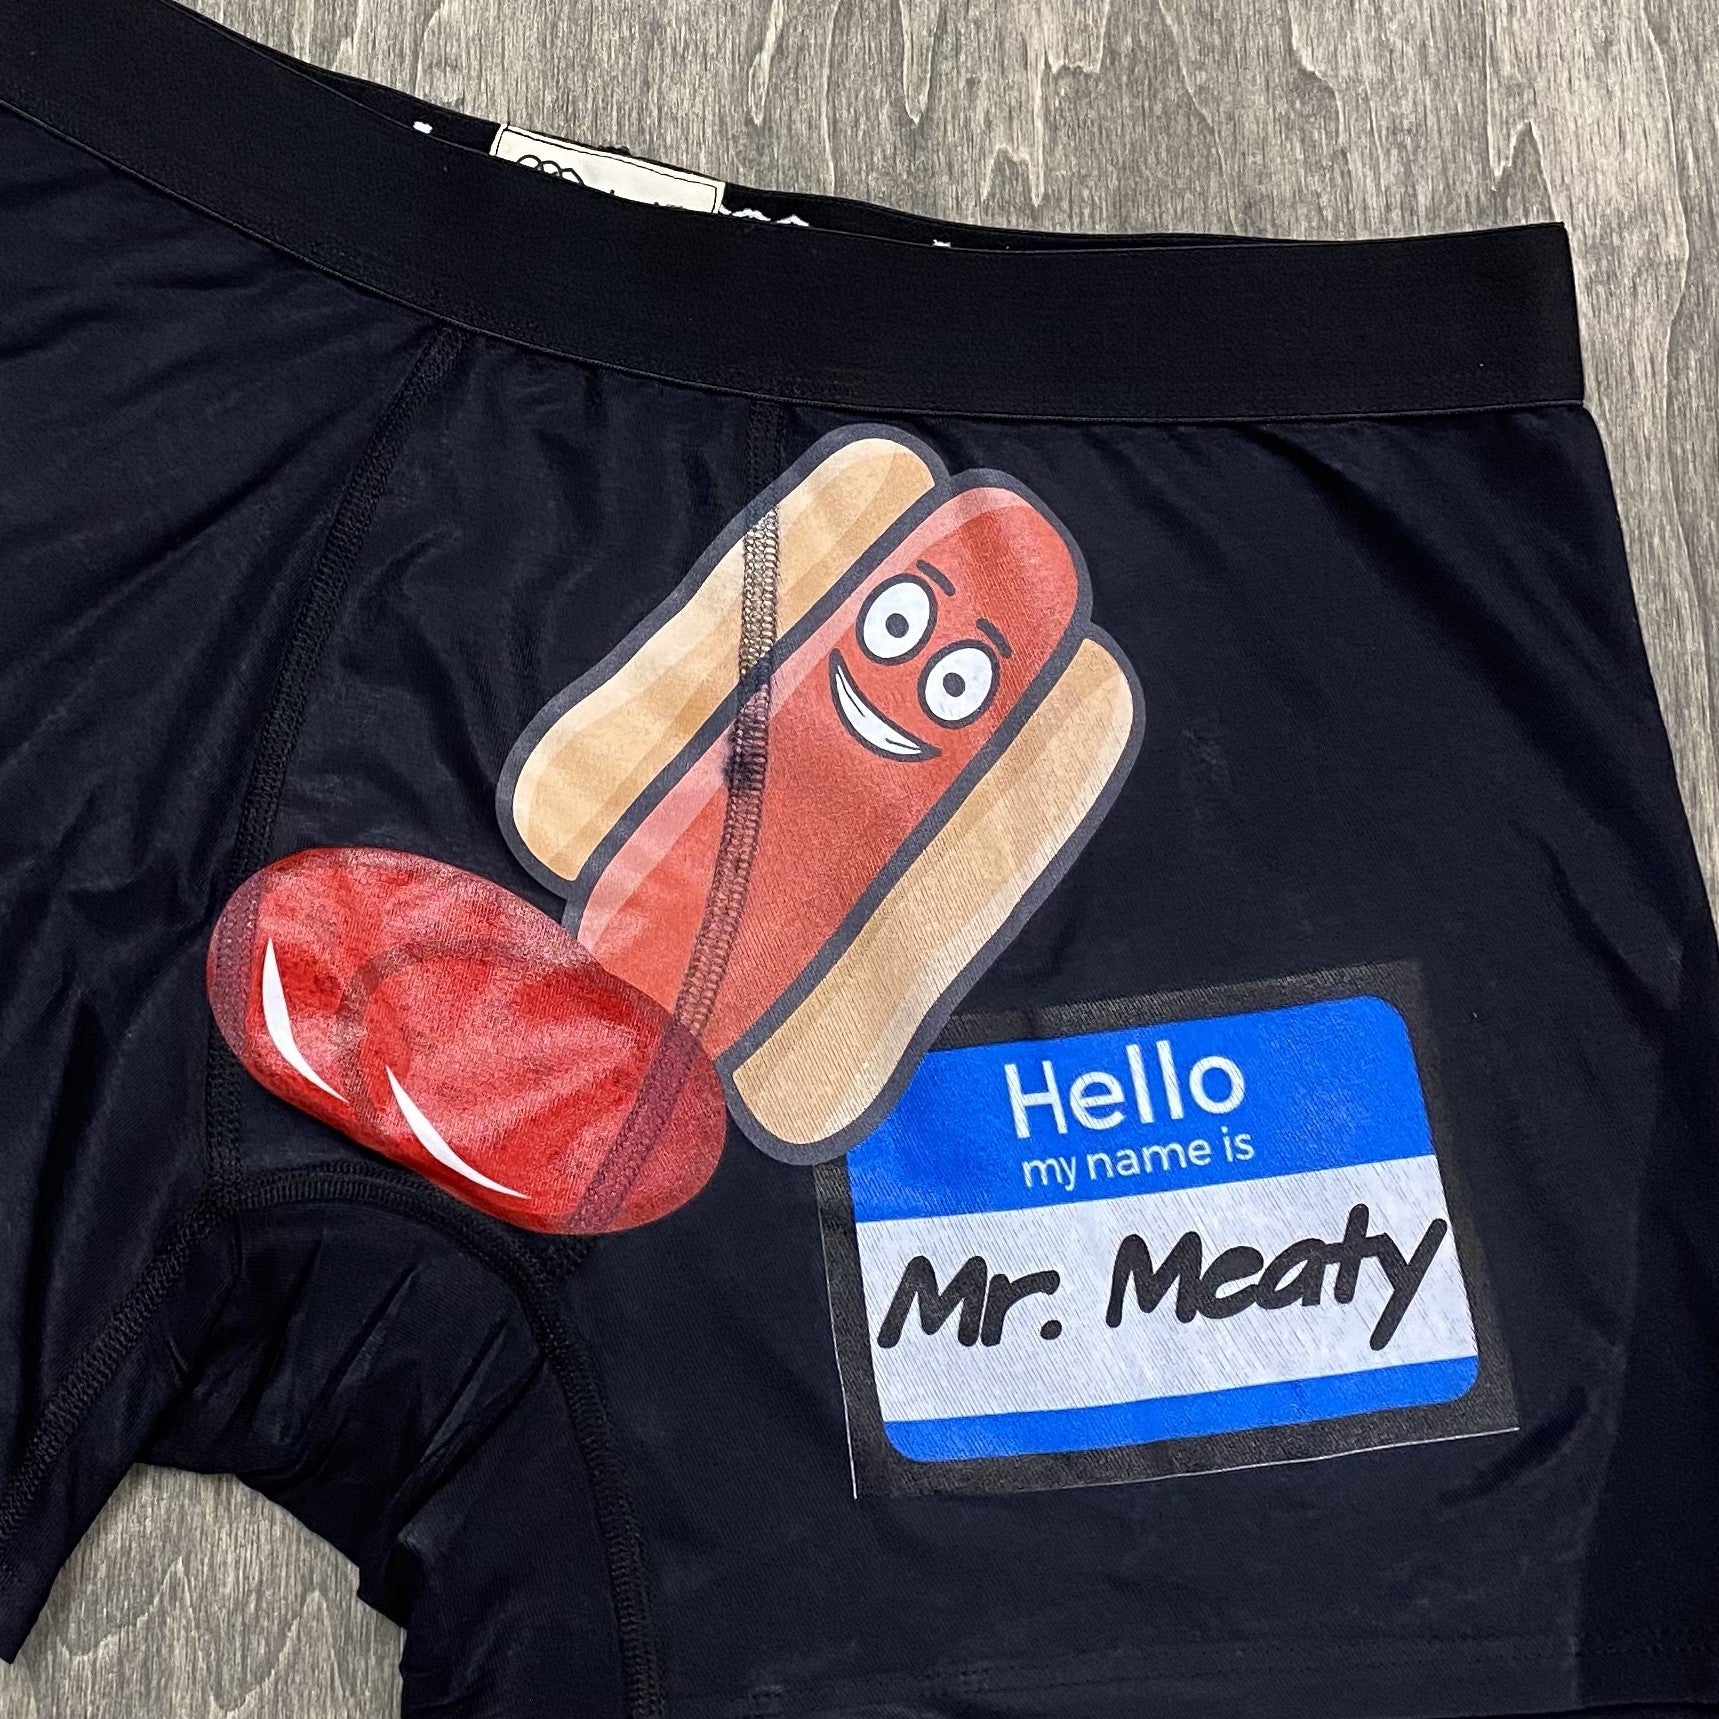 black boxer briefs showing a custom inked design - a hot dog, some salami, and a name tag that says "hello my name is Mr. Meaty" 